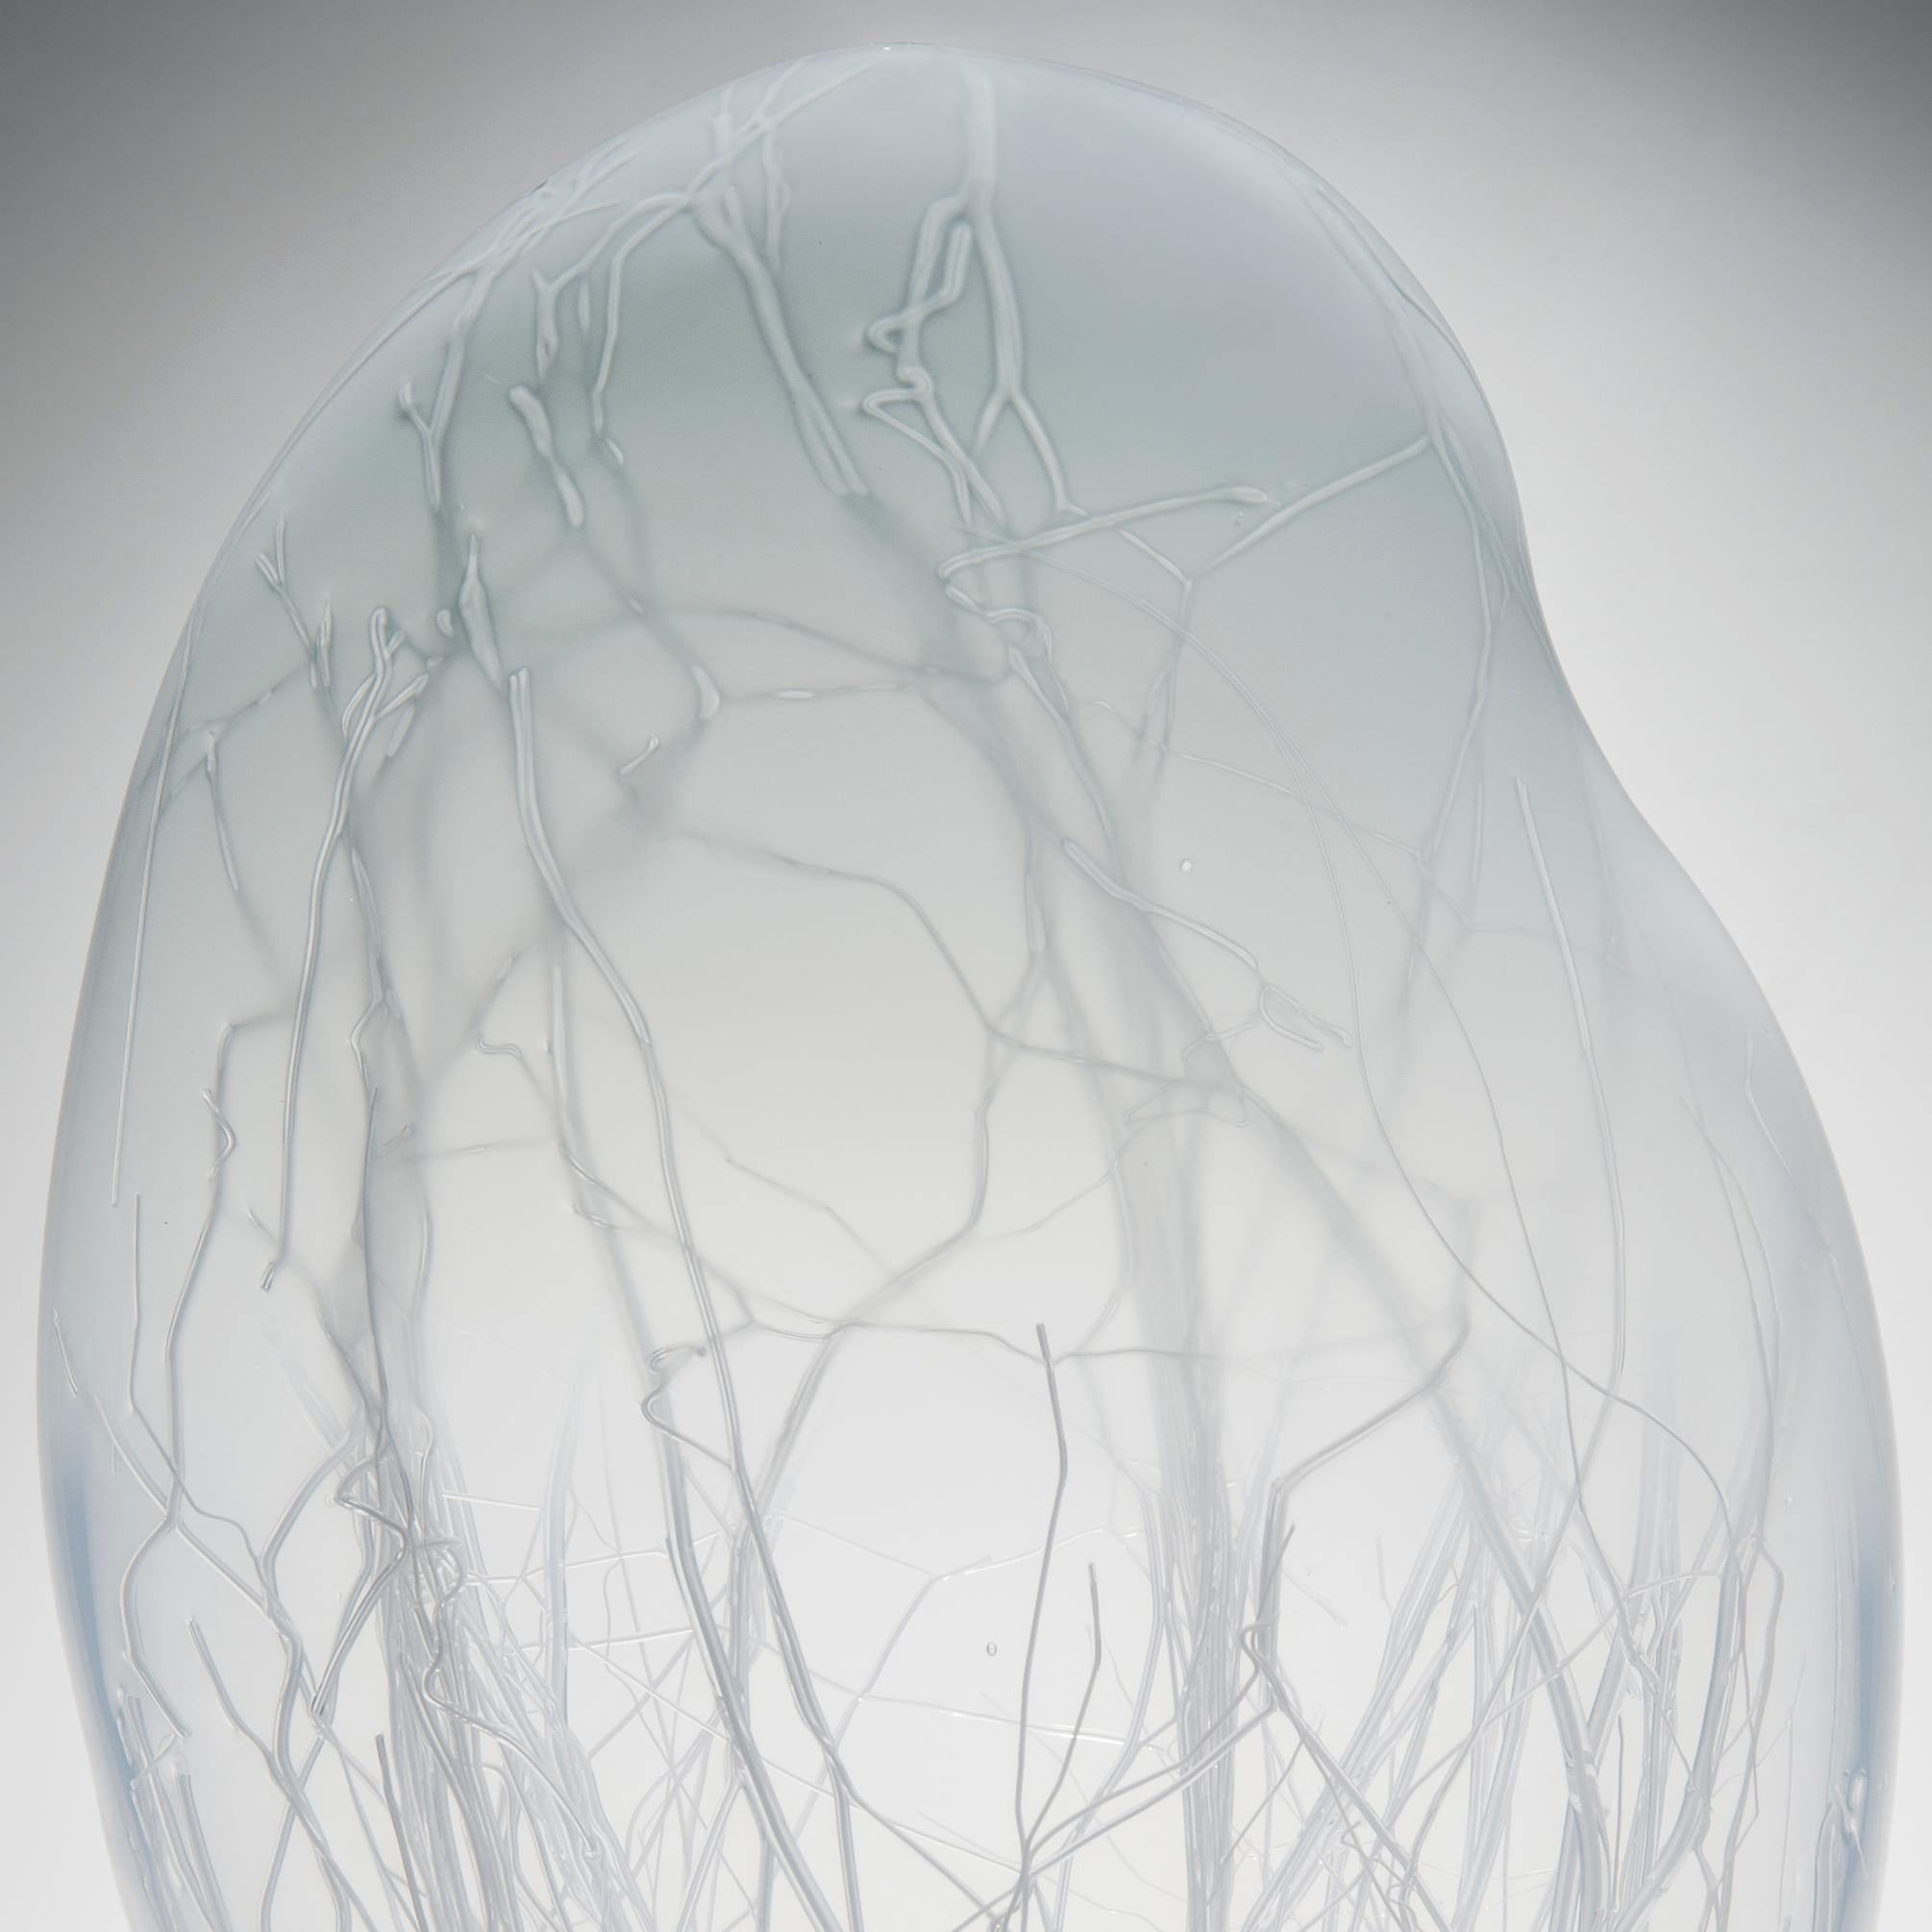 Organic Modern Penumbra in Grey, a White & Dove Grey Glass Sculpture by Enemark & Thompson For Sale